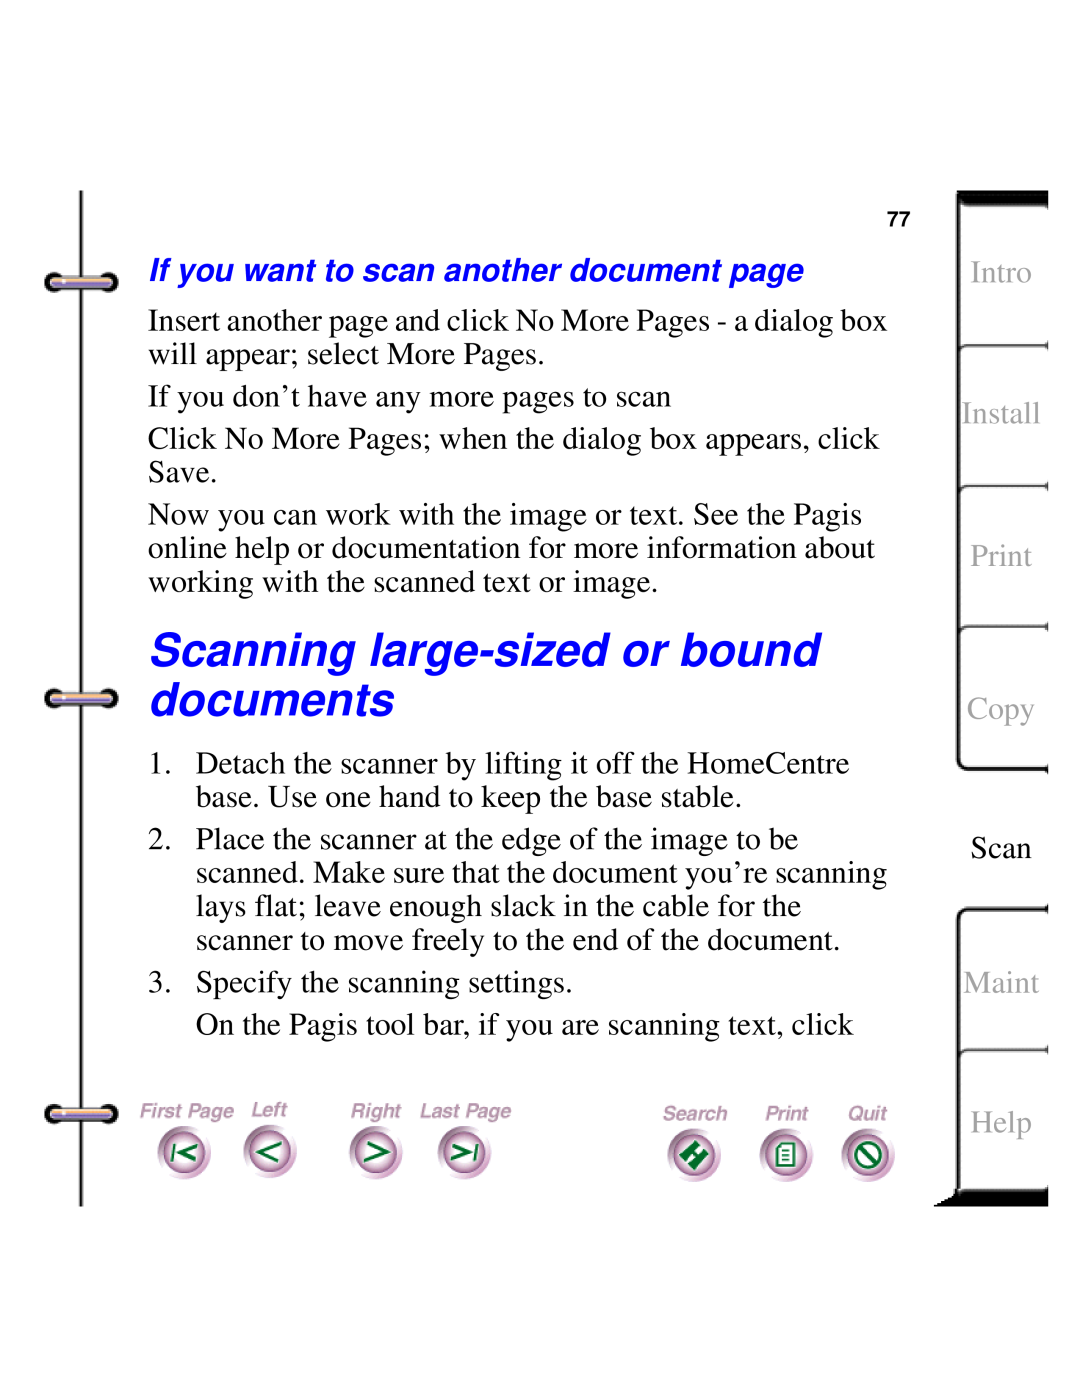 Xerox Document HomeCentre Scanning large-sizedor bound documents, If you want to scan another document page, Maint, Help 